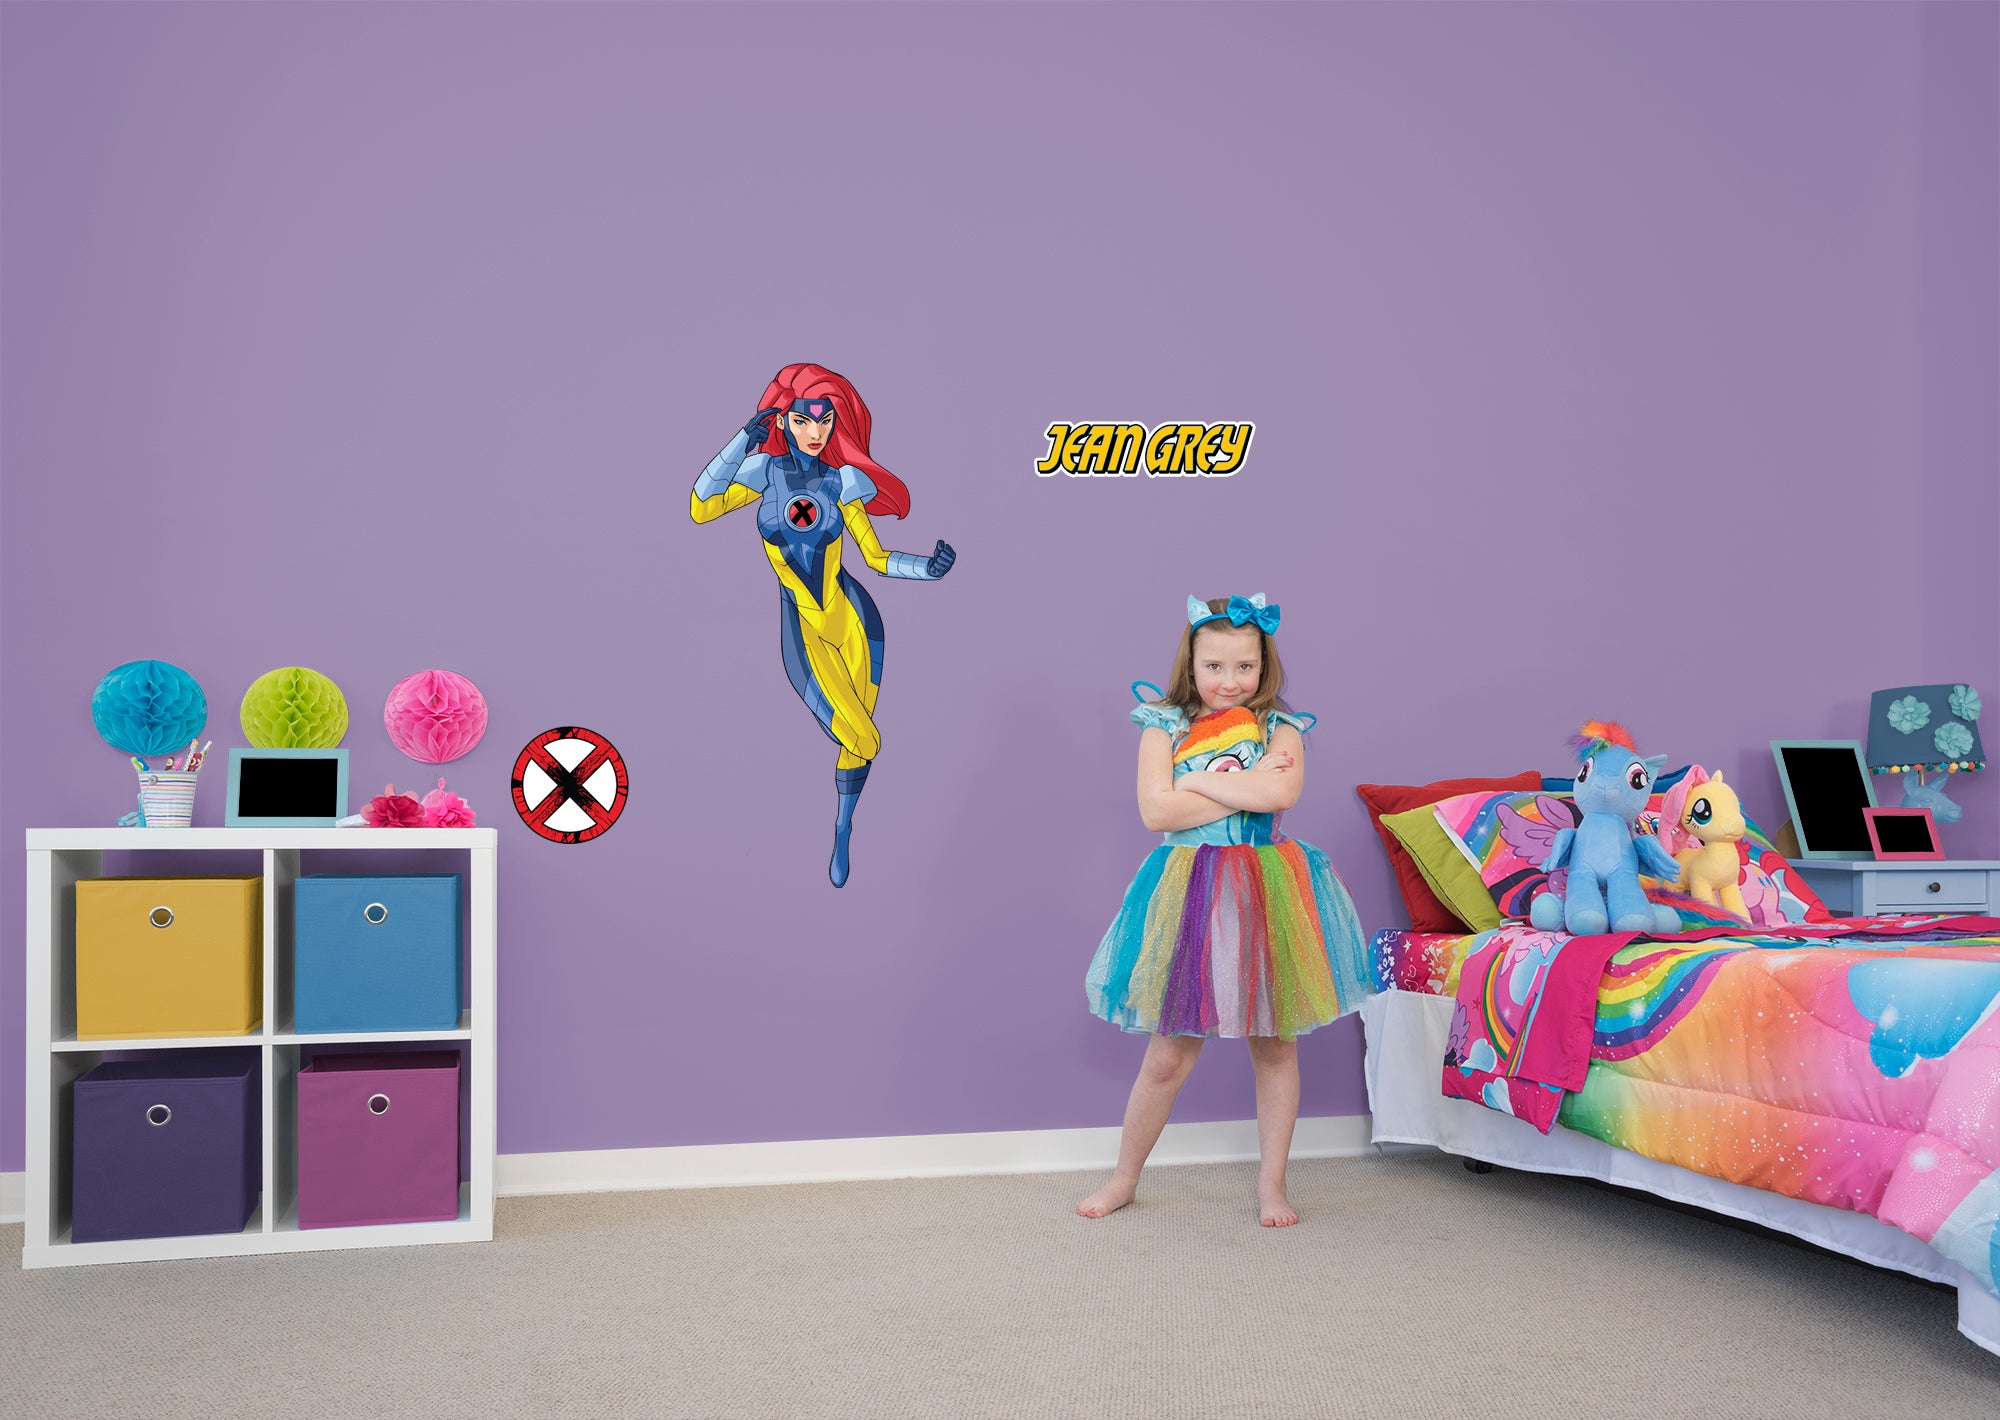 X-Men Jean Grey RealBig - Officially Licensed Marvel Removable Wall Decal Giant Character + 2 Decals (26"W x 51"H) by Fathead |